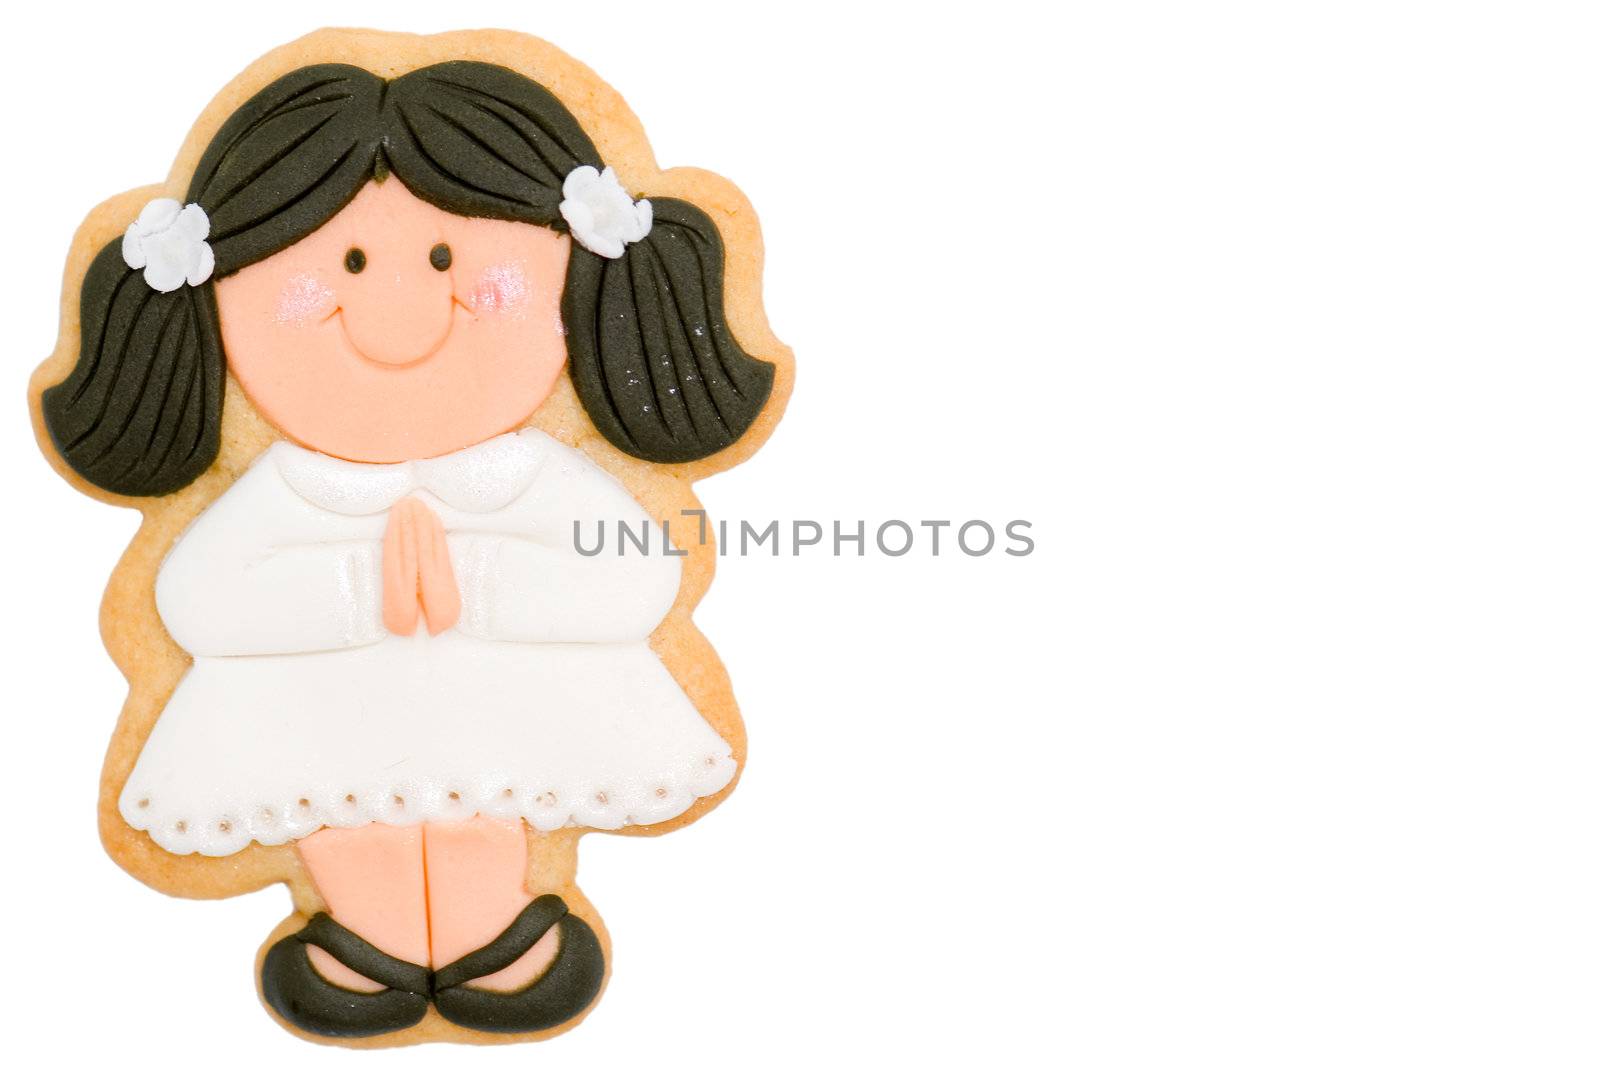 first communion cookie blond girl isolated on white background 